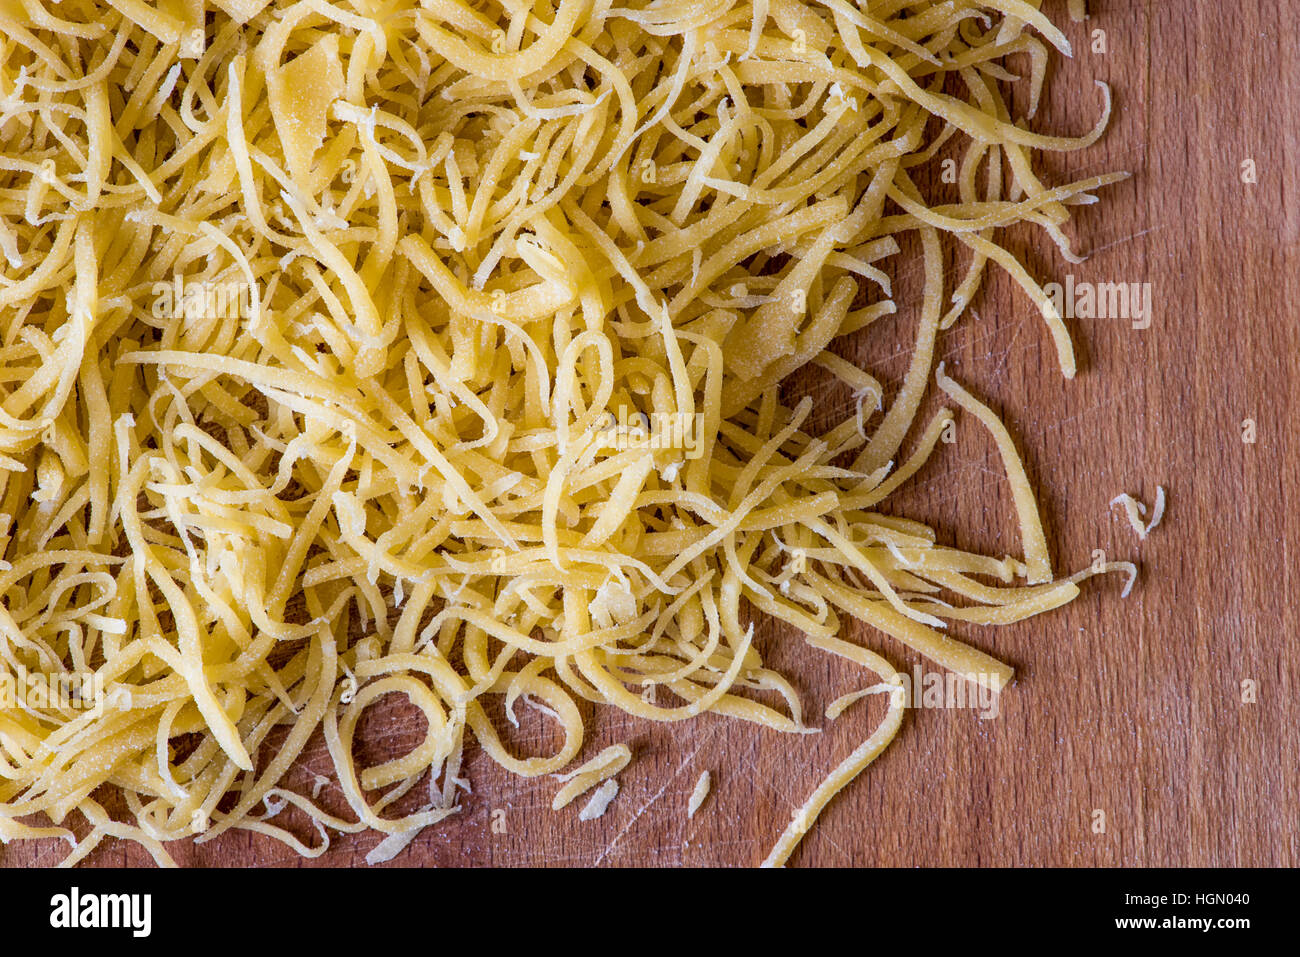 Homemade noodles on the table in natural light Stock Photo